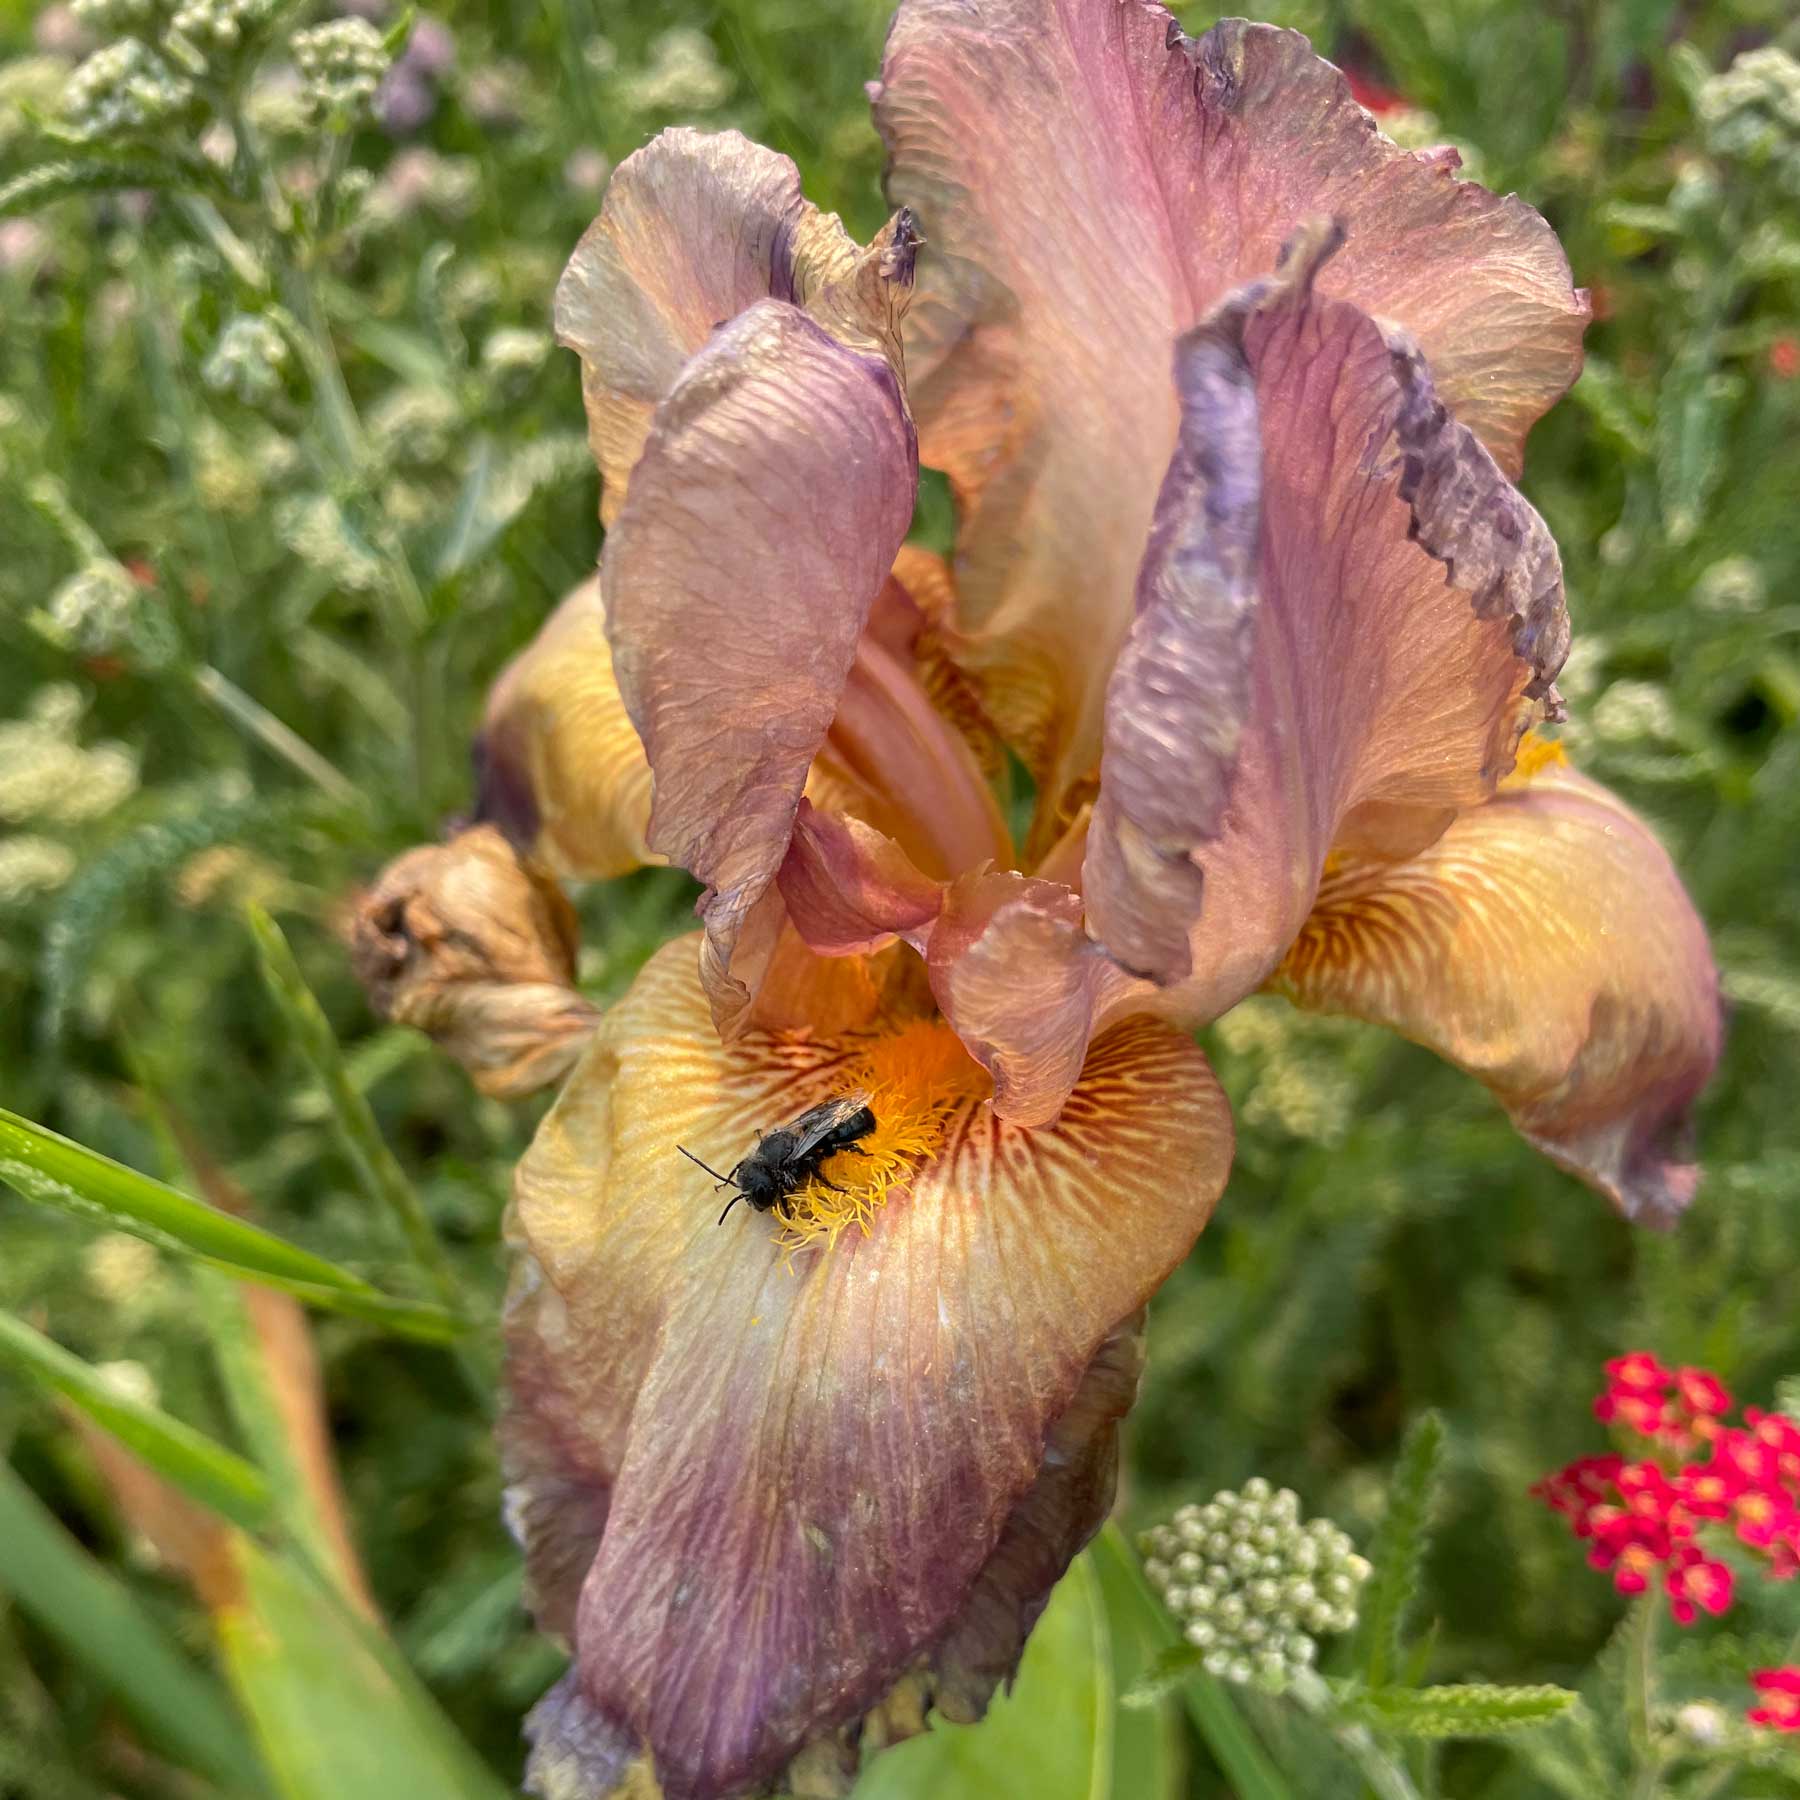 dark colored bee, possibly a mason bee, laying on the beard of an iris with yarrow blooming in the background